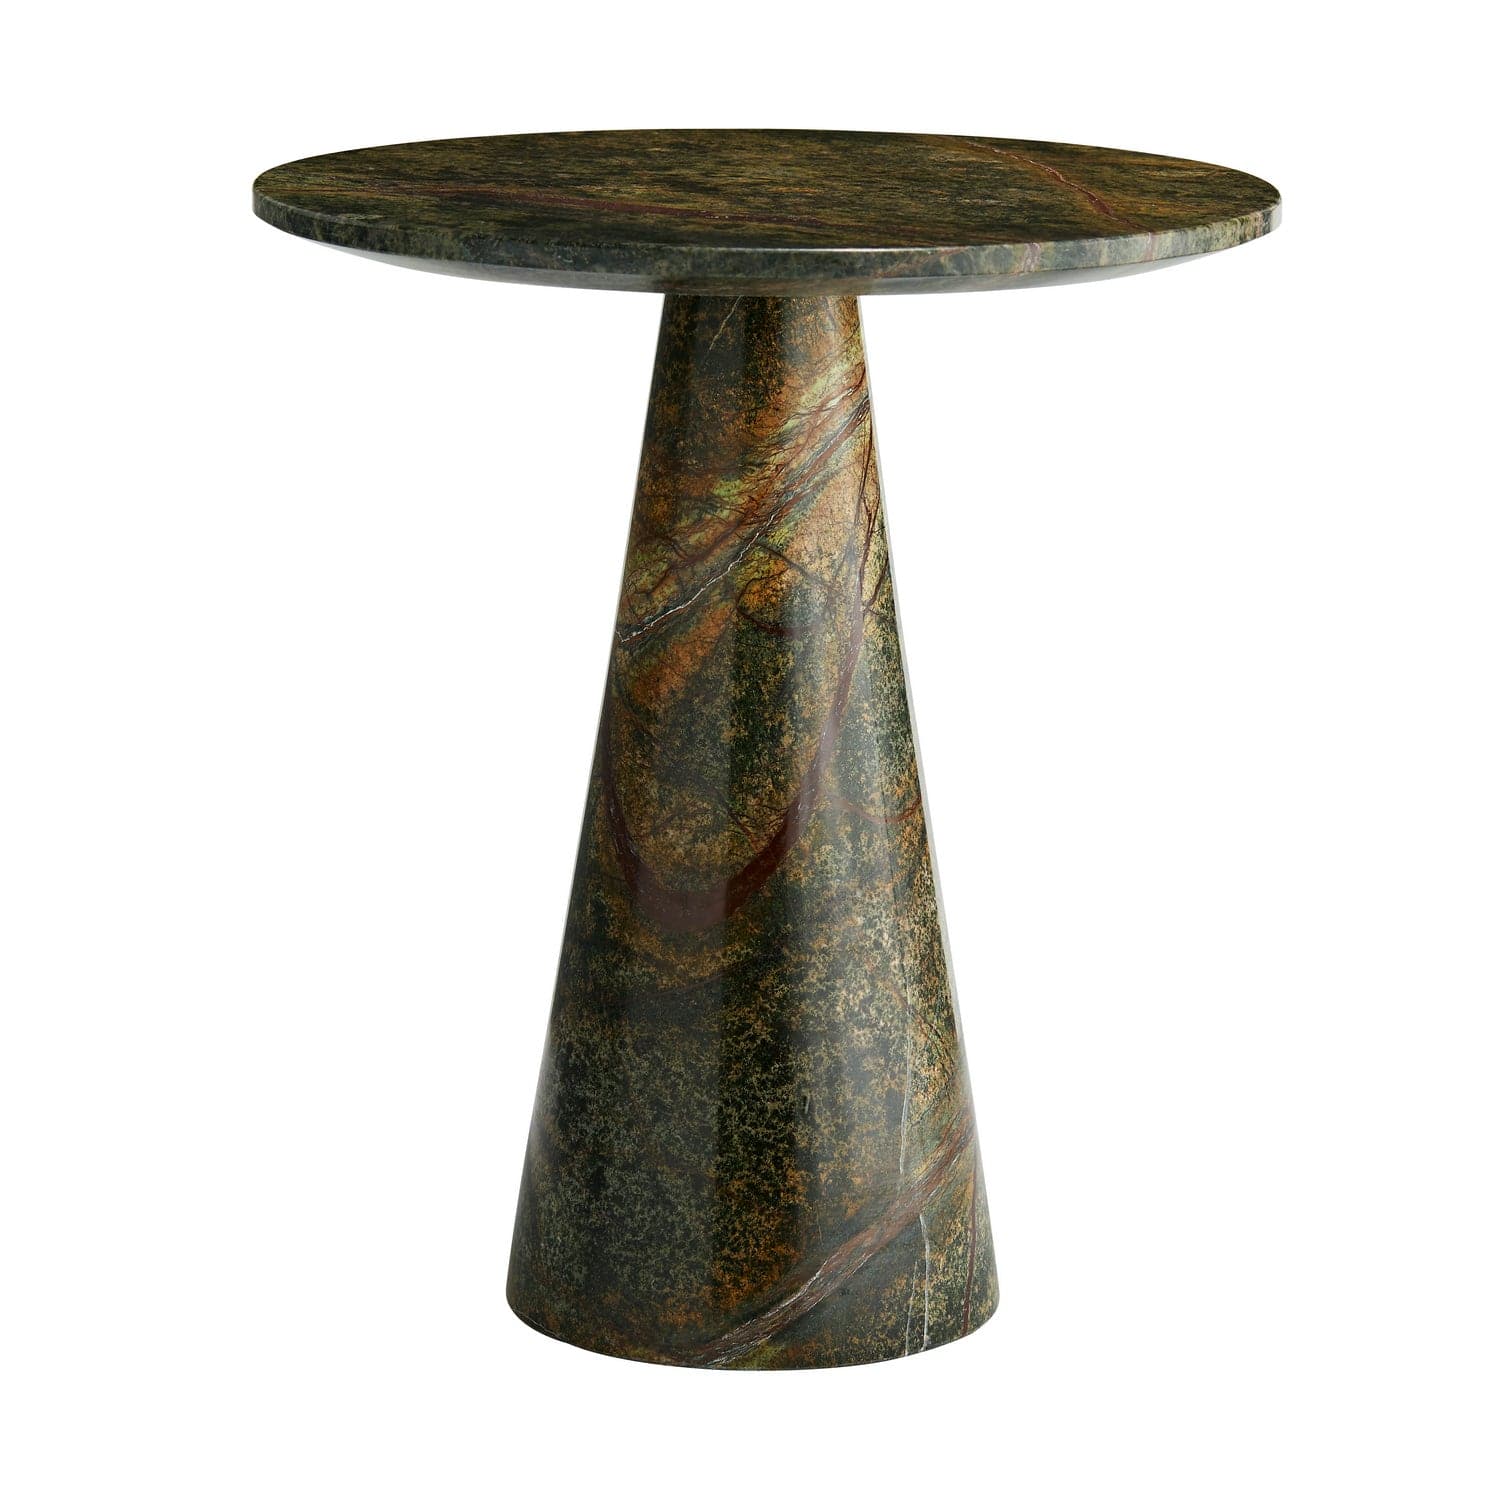 Accent Table from the Icarius collection in Jungle finish